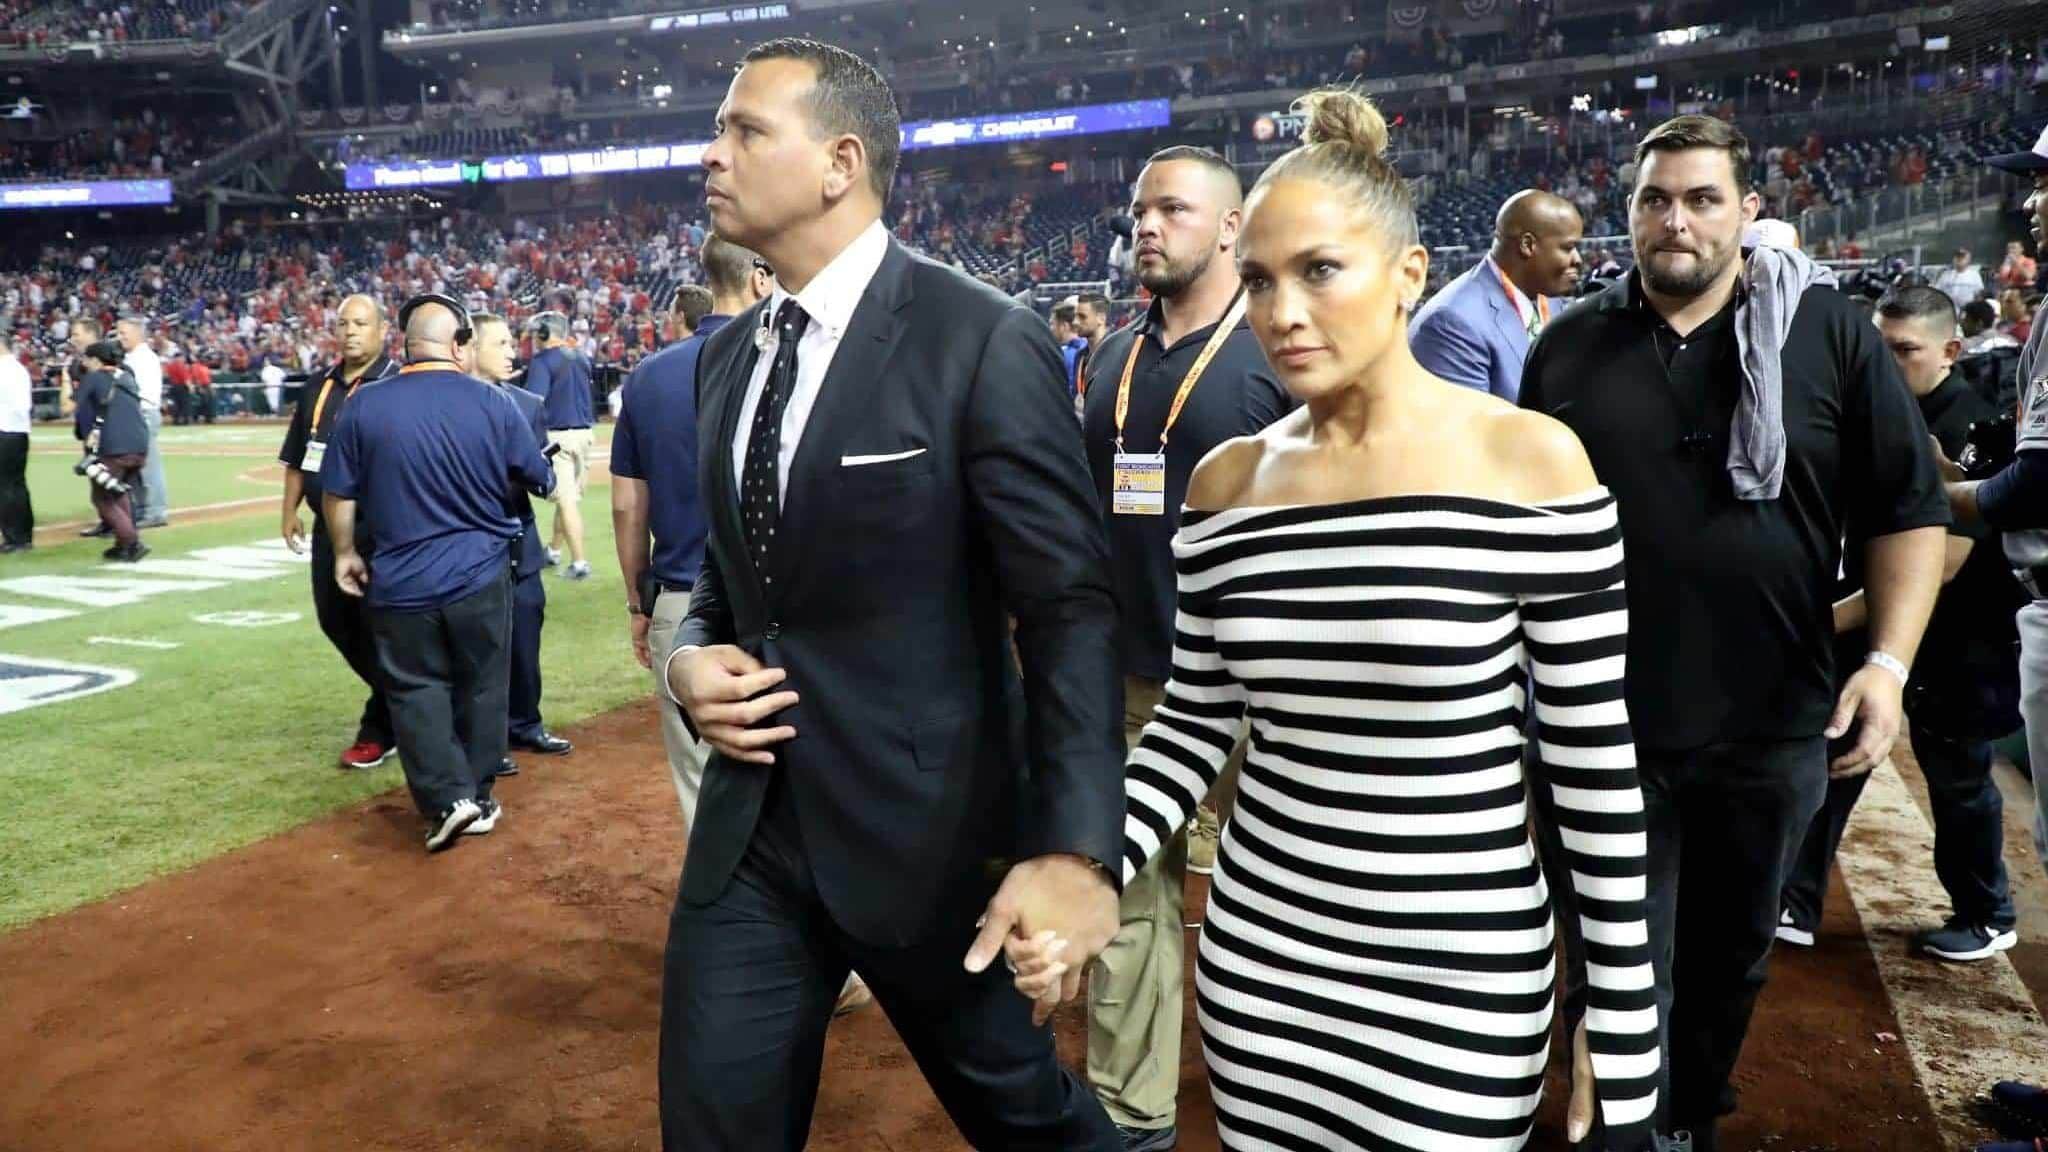 WASHINGTON, DC - JULY 17: Alex Rodriguez and Jennifer Lopez attend the 89th MLB All-Star Game, presented by Mastercard at Nationals Park on July 17, 2018 in Washington, DC. New York Mets